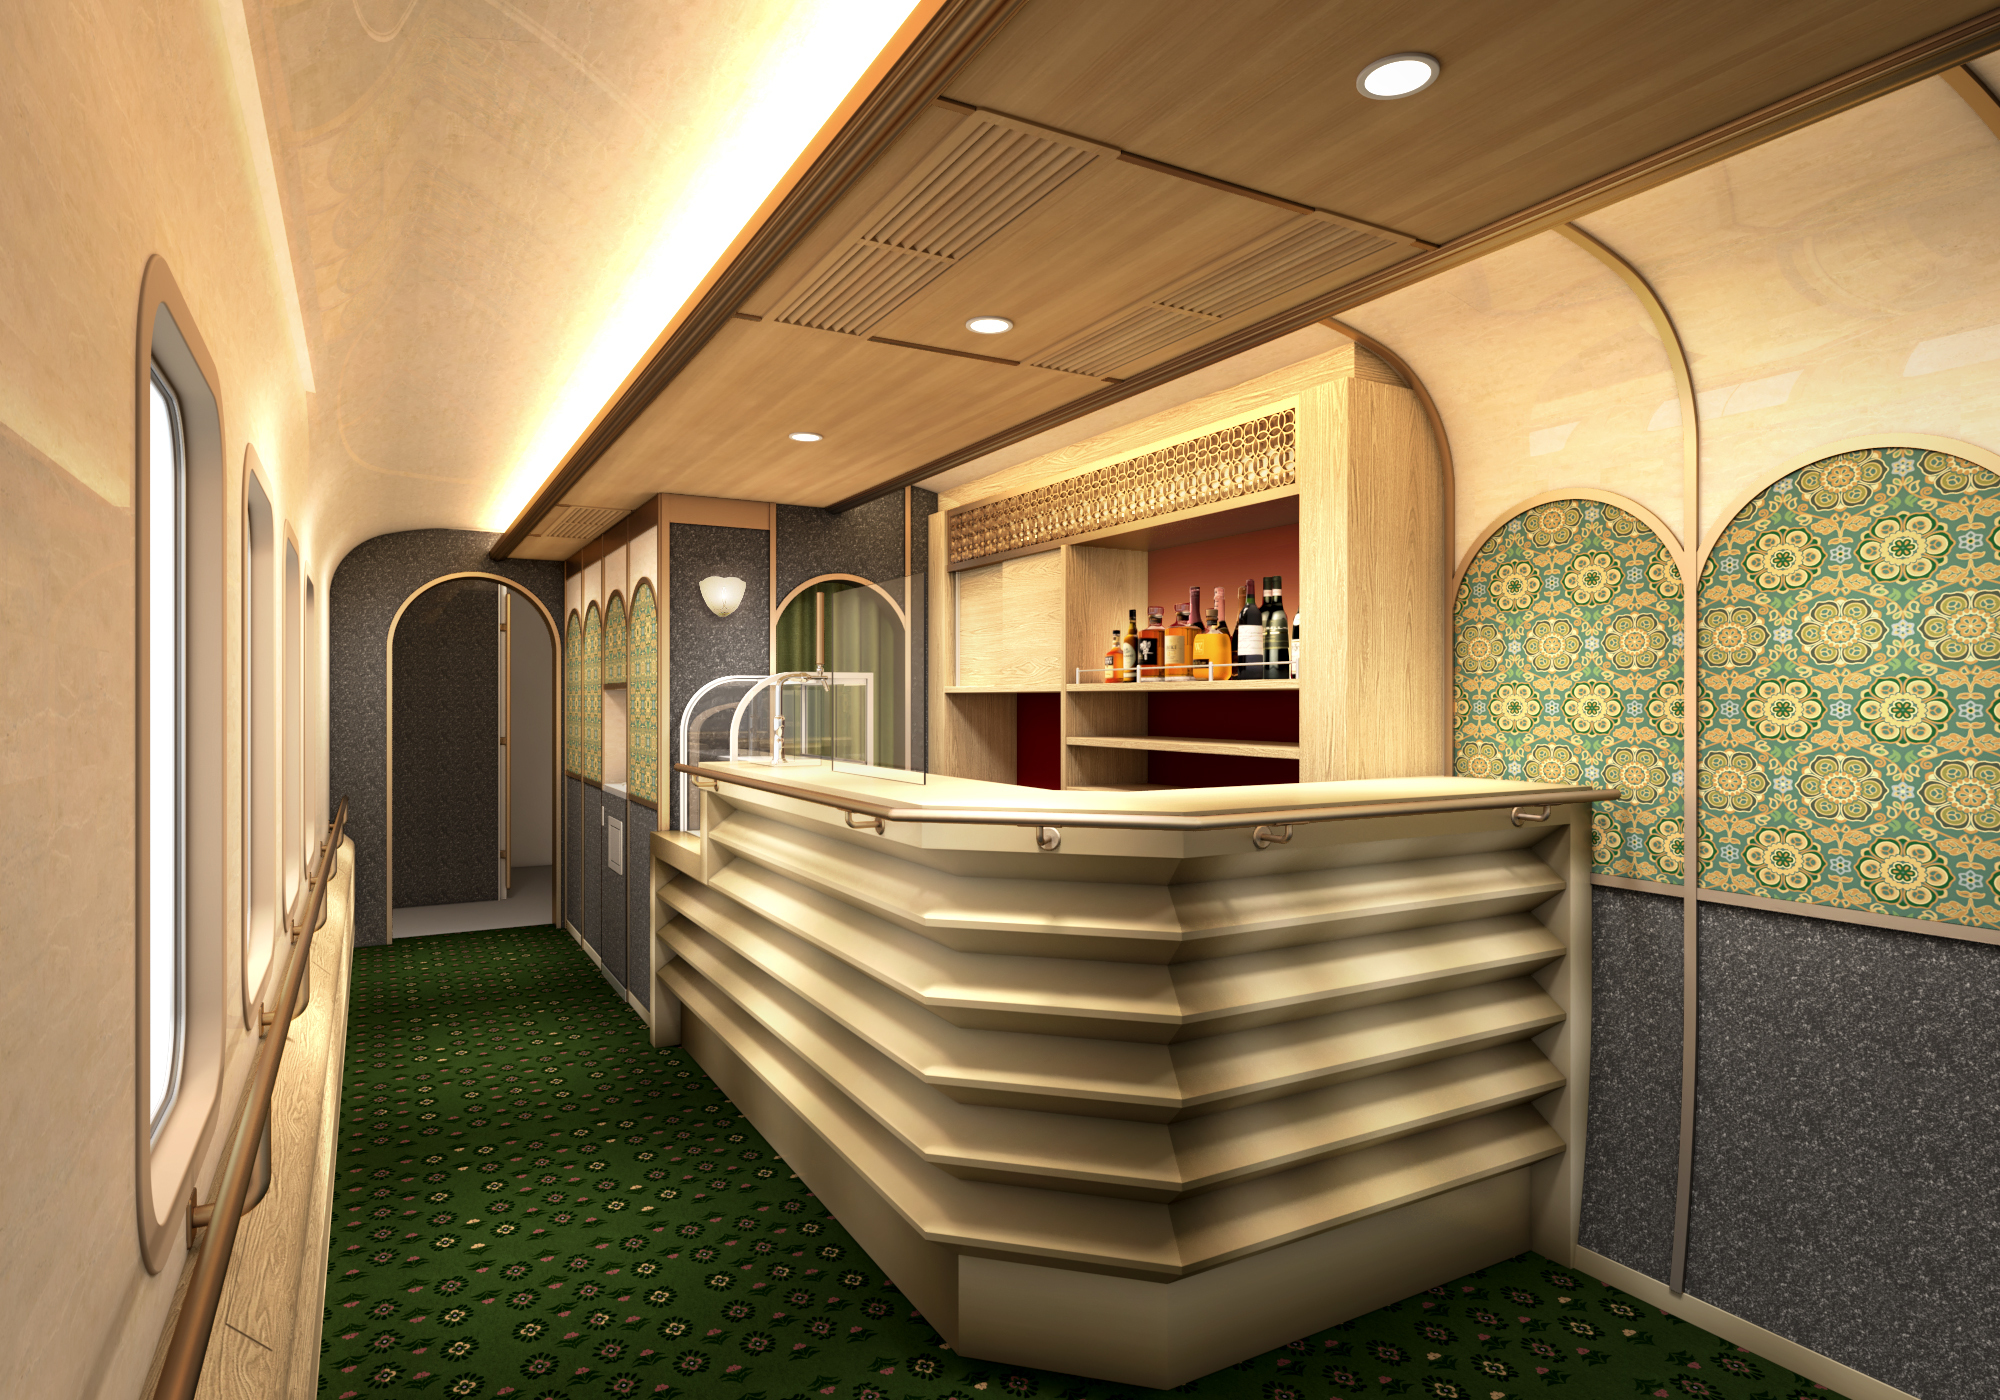 An artist's impression of a luxury train's onboard bar and restaurant, with green carpet and a light wooden bar